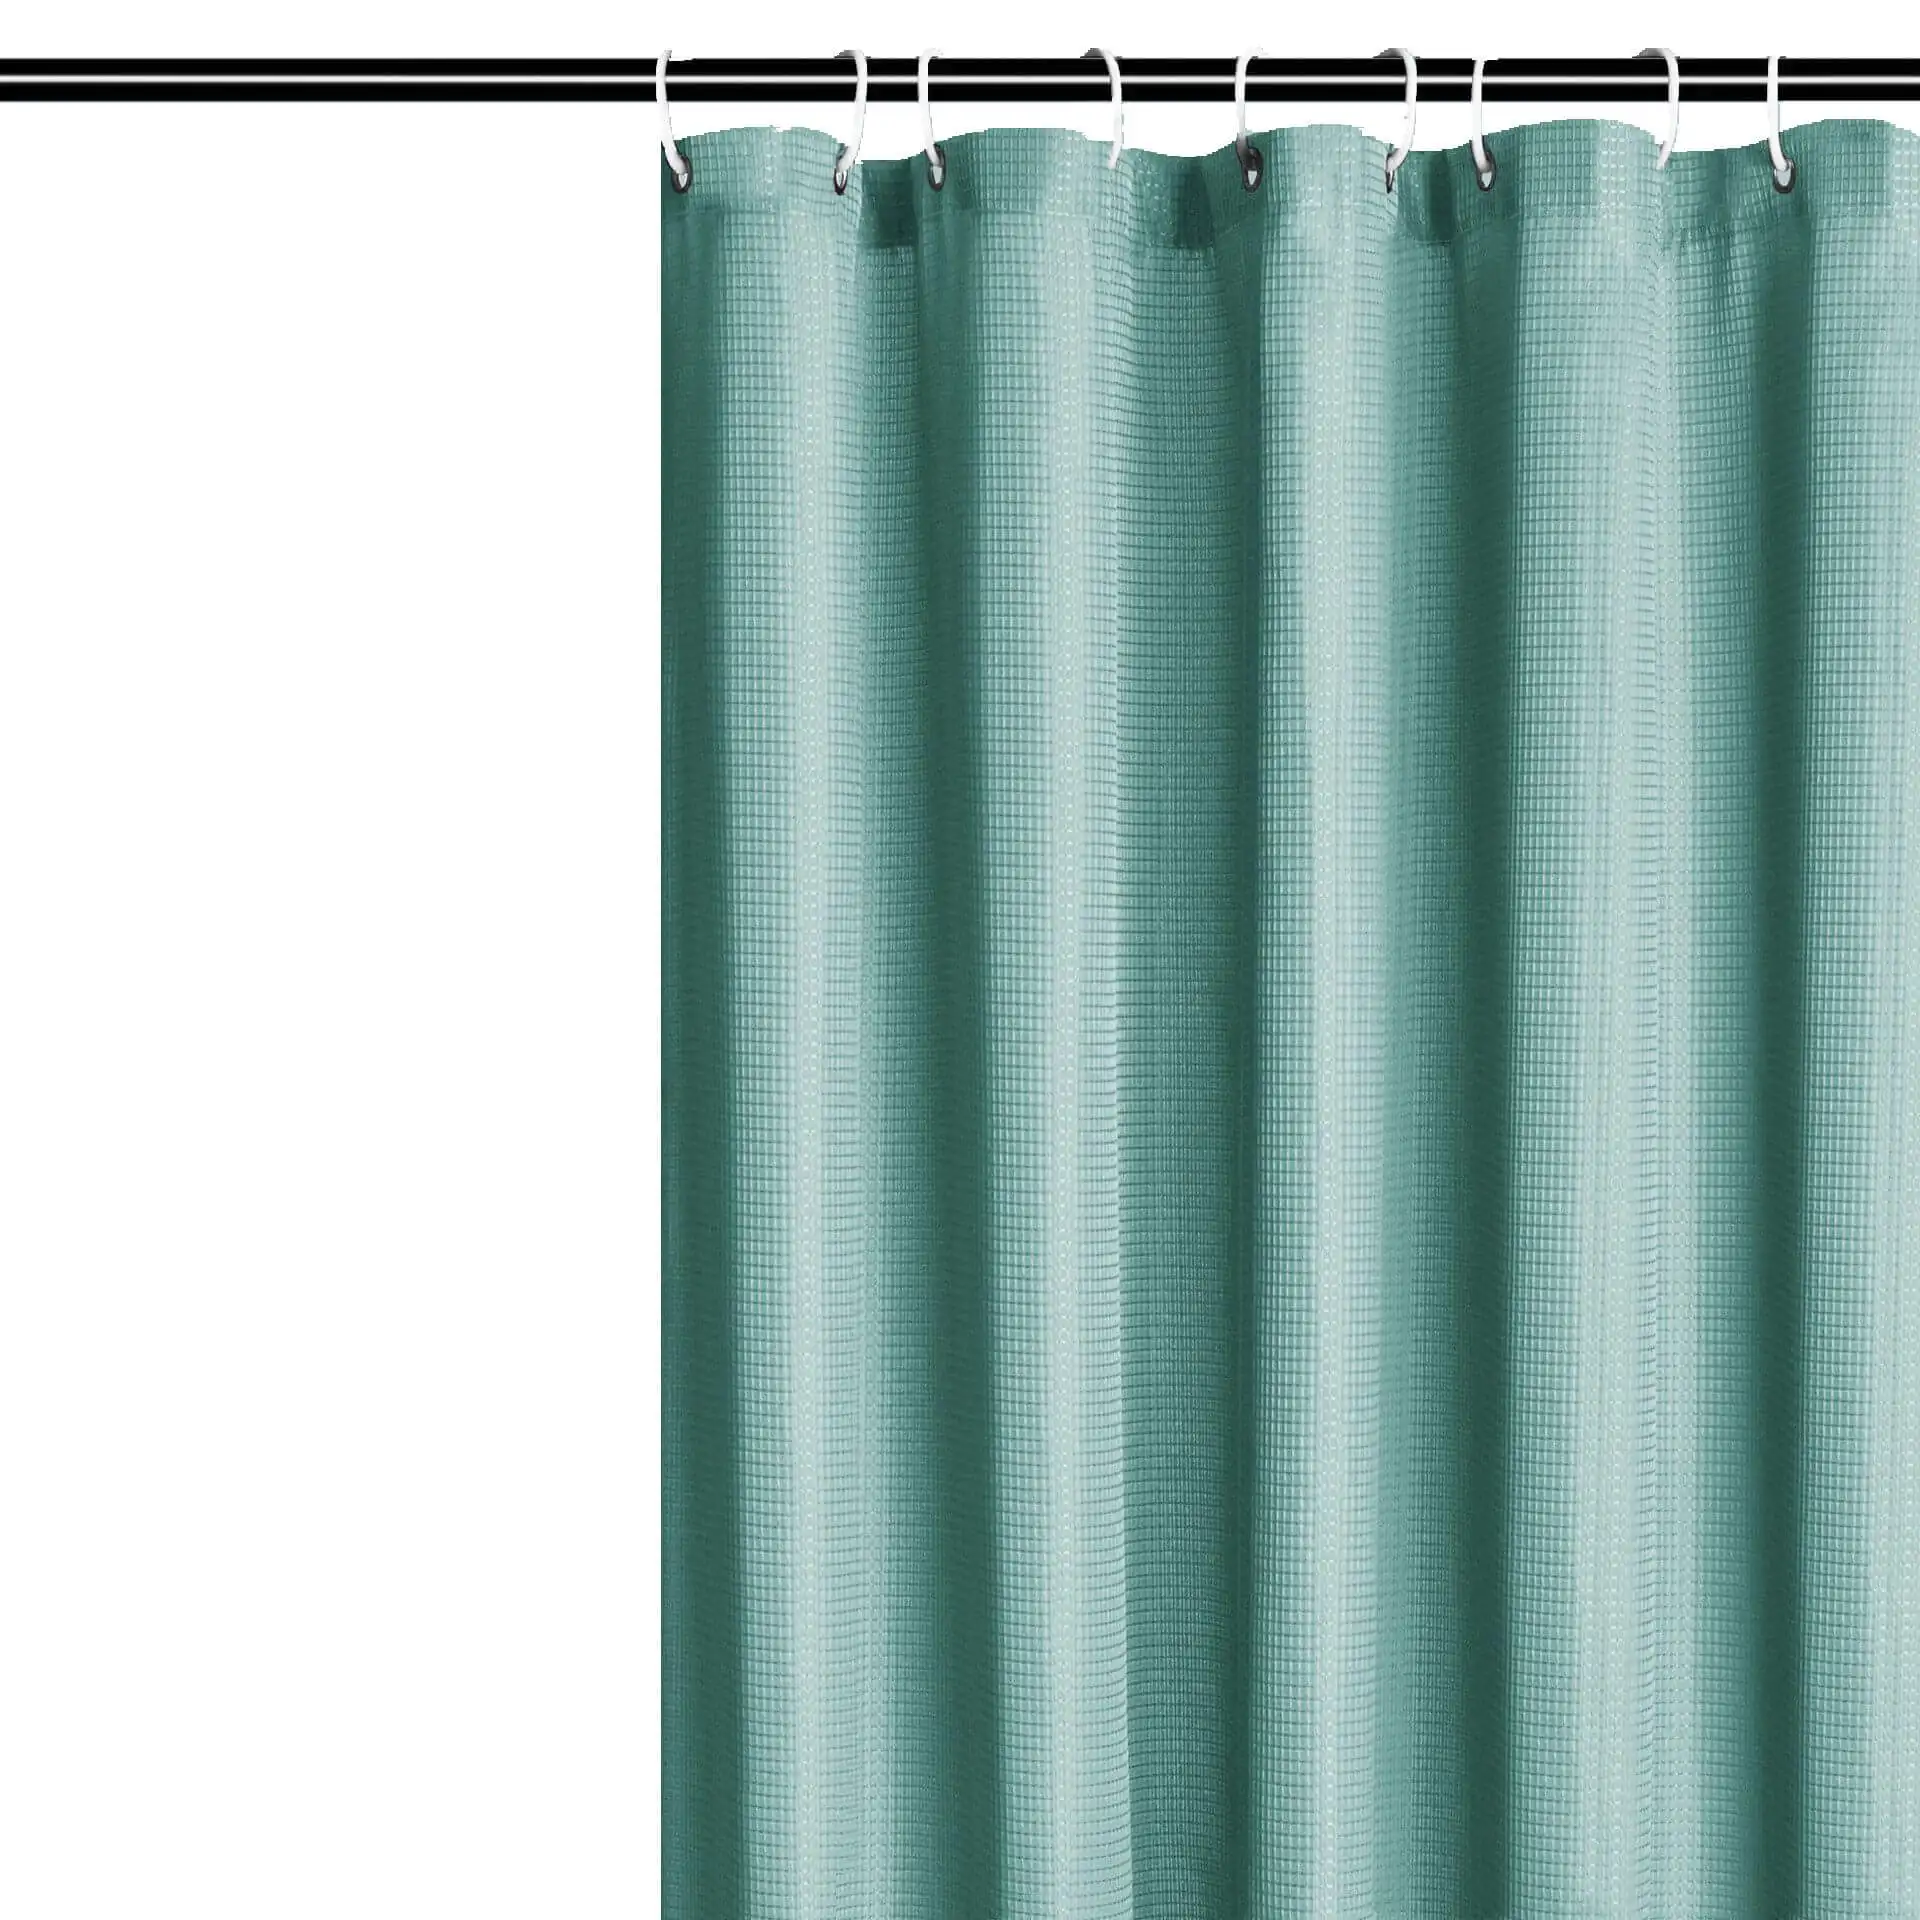 

i@home mint green 100% polyester plain waterproof modern fabric designers shower curtains, As picture show